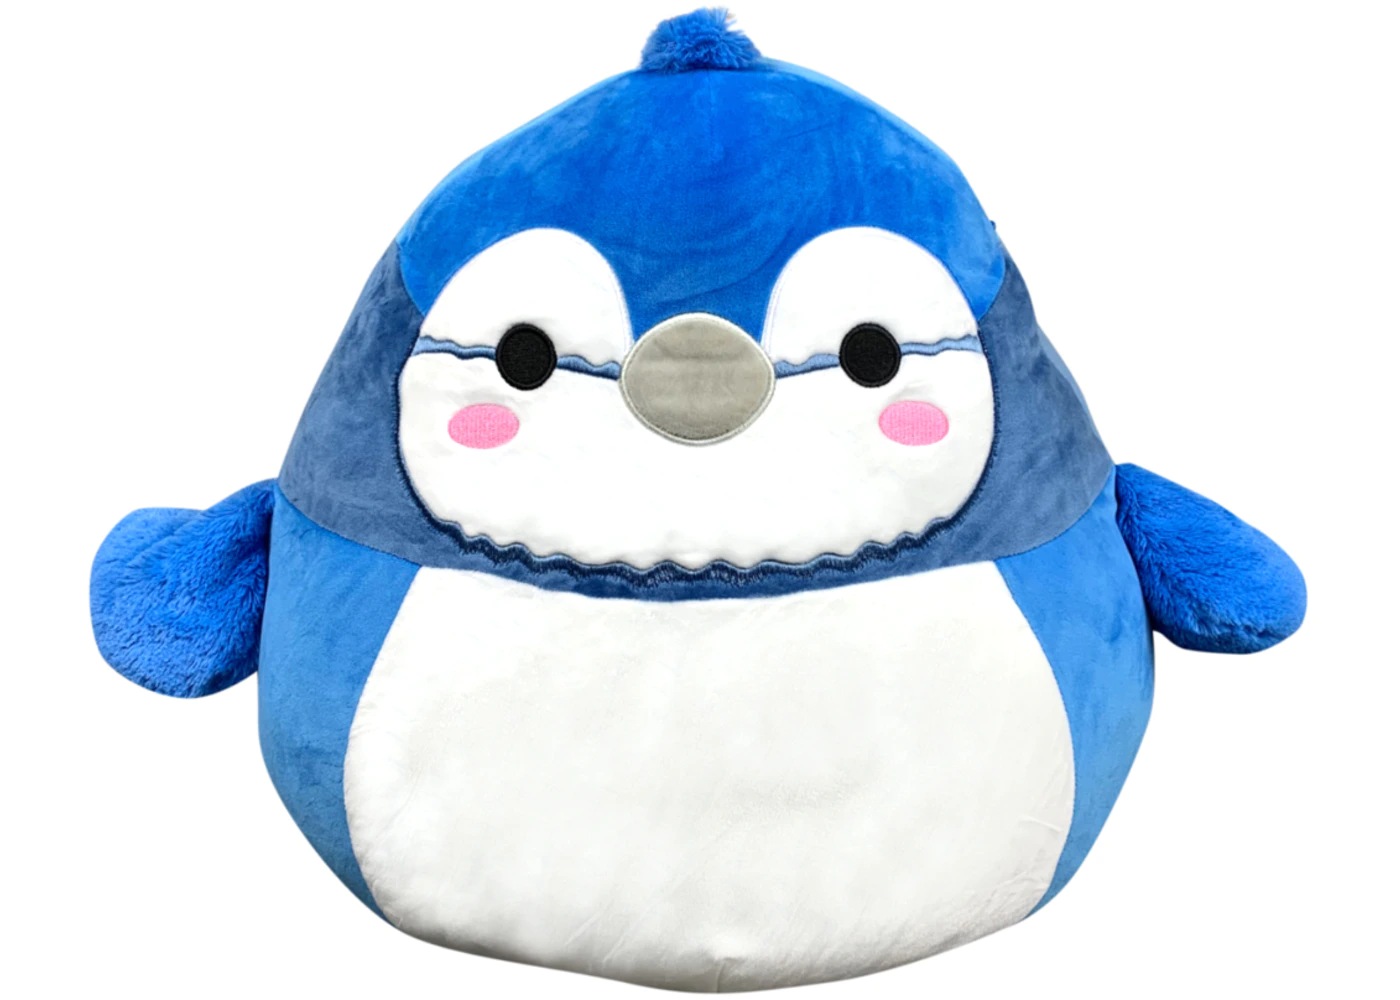 https://static.wikia.nocookie.net/squishmallowsquad/images/9/97/Babs_12_inch.webp/revision/latest?cb=20210608071115